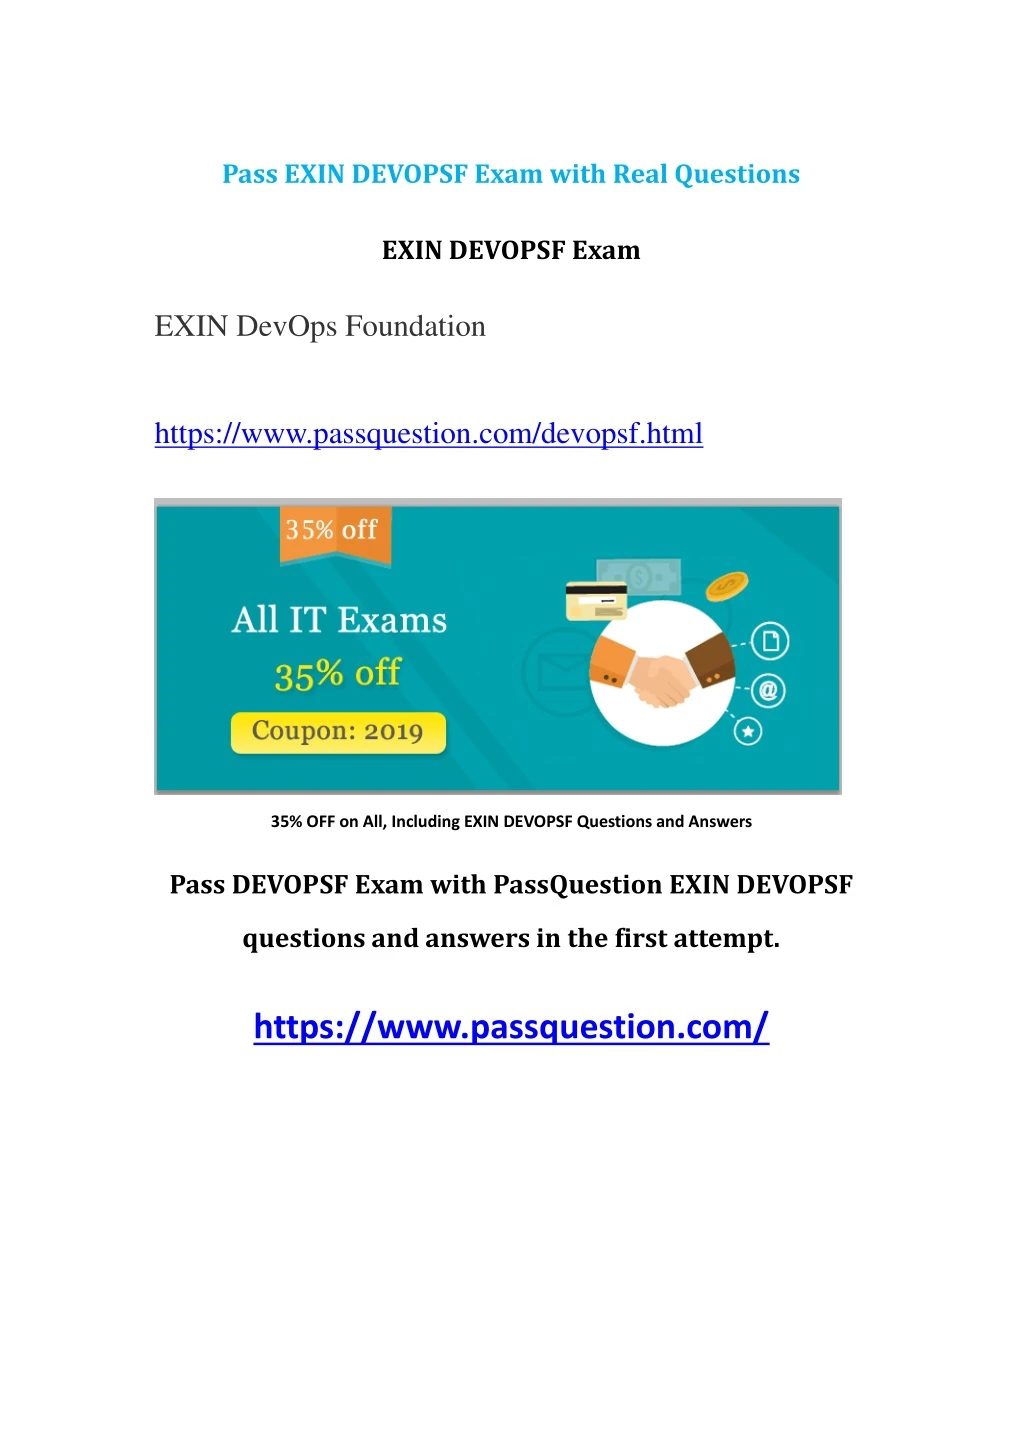 pass exin devopsf exam with real questions